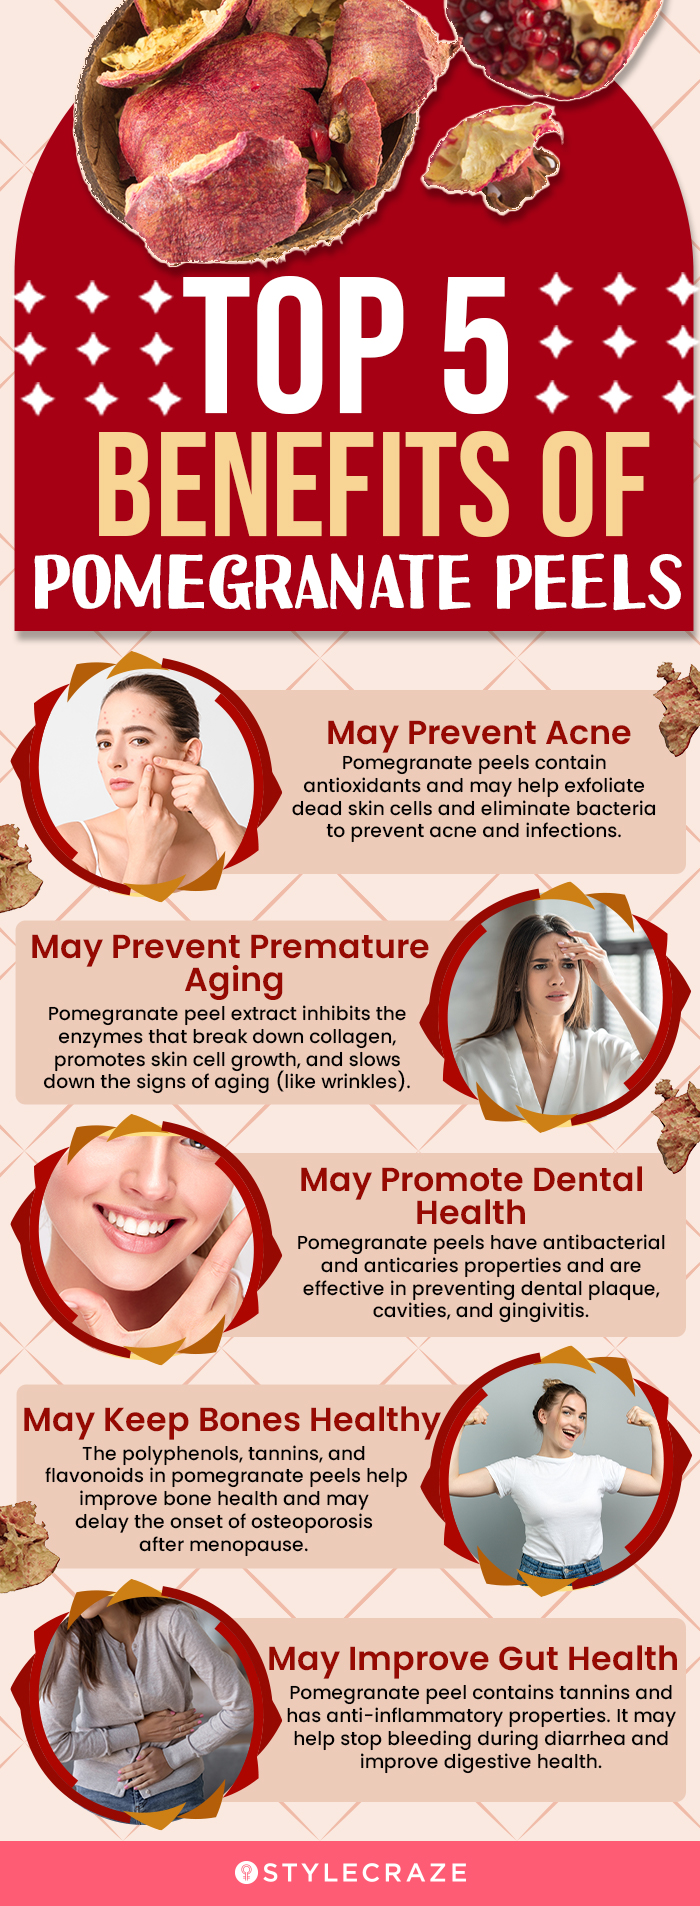 top 5 benefits of pomegranate peels (infographic)